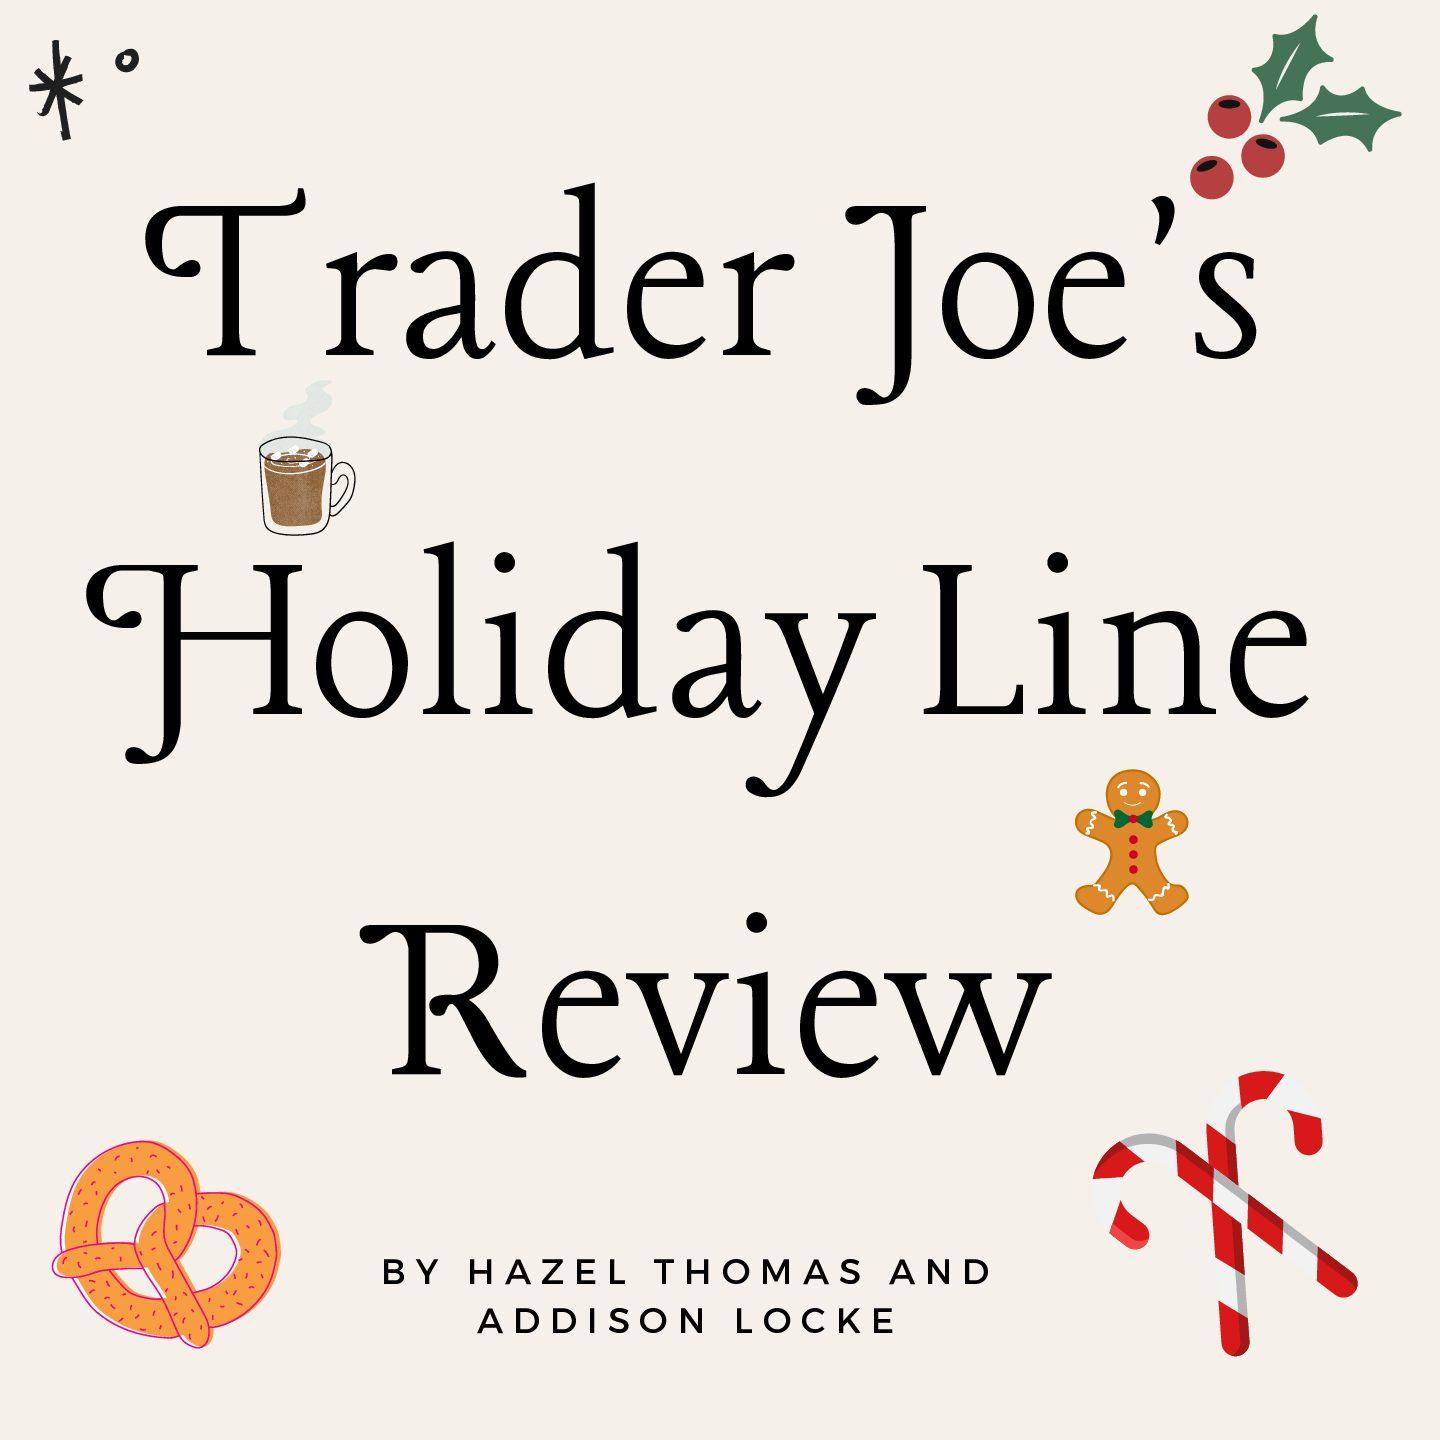 Trader Joes Holiday Line Review